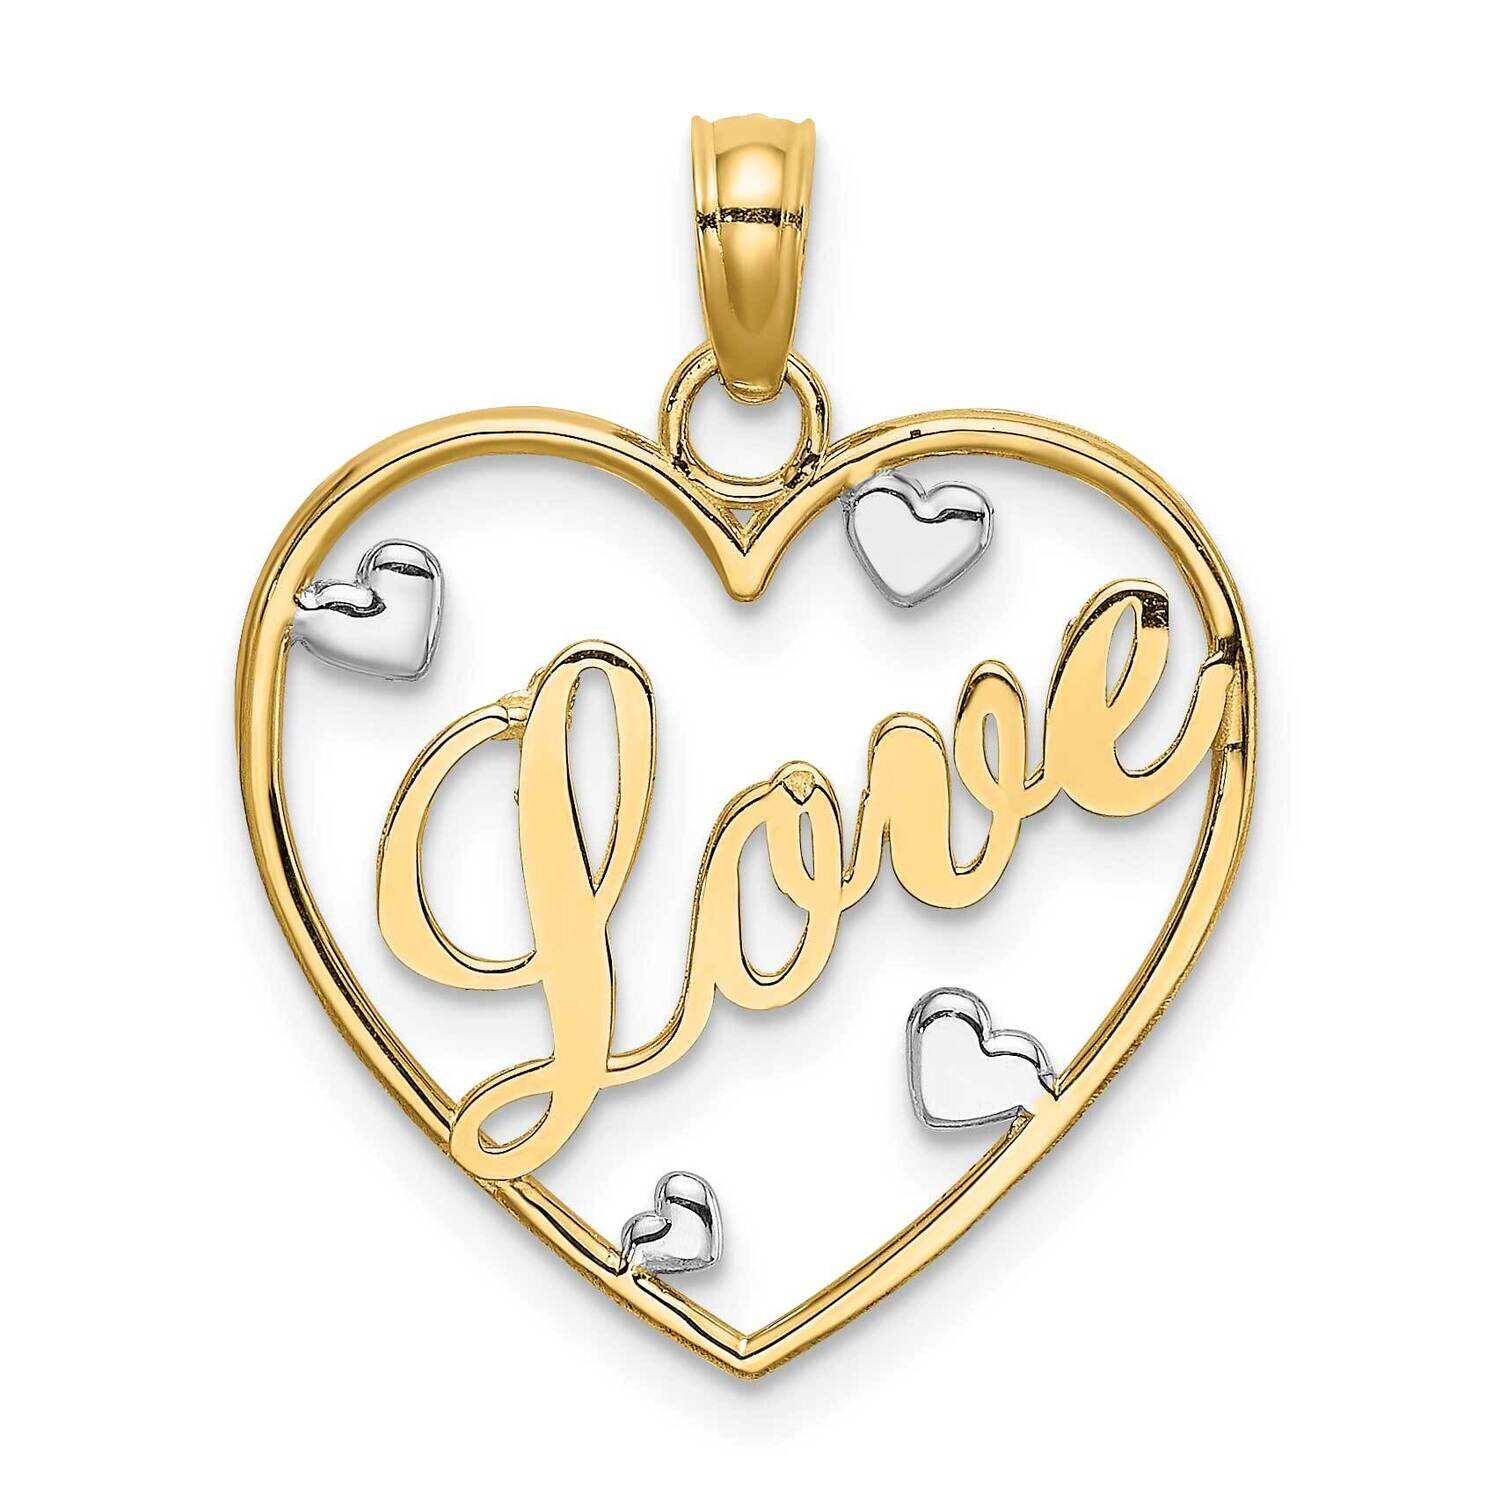 Love In Heart with Rhodium-Plated Heart Accents Charm 14k Gold K9395